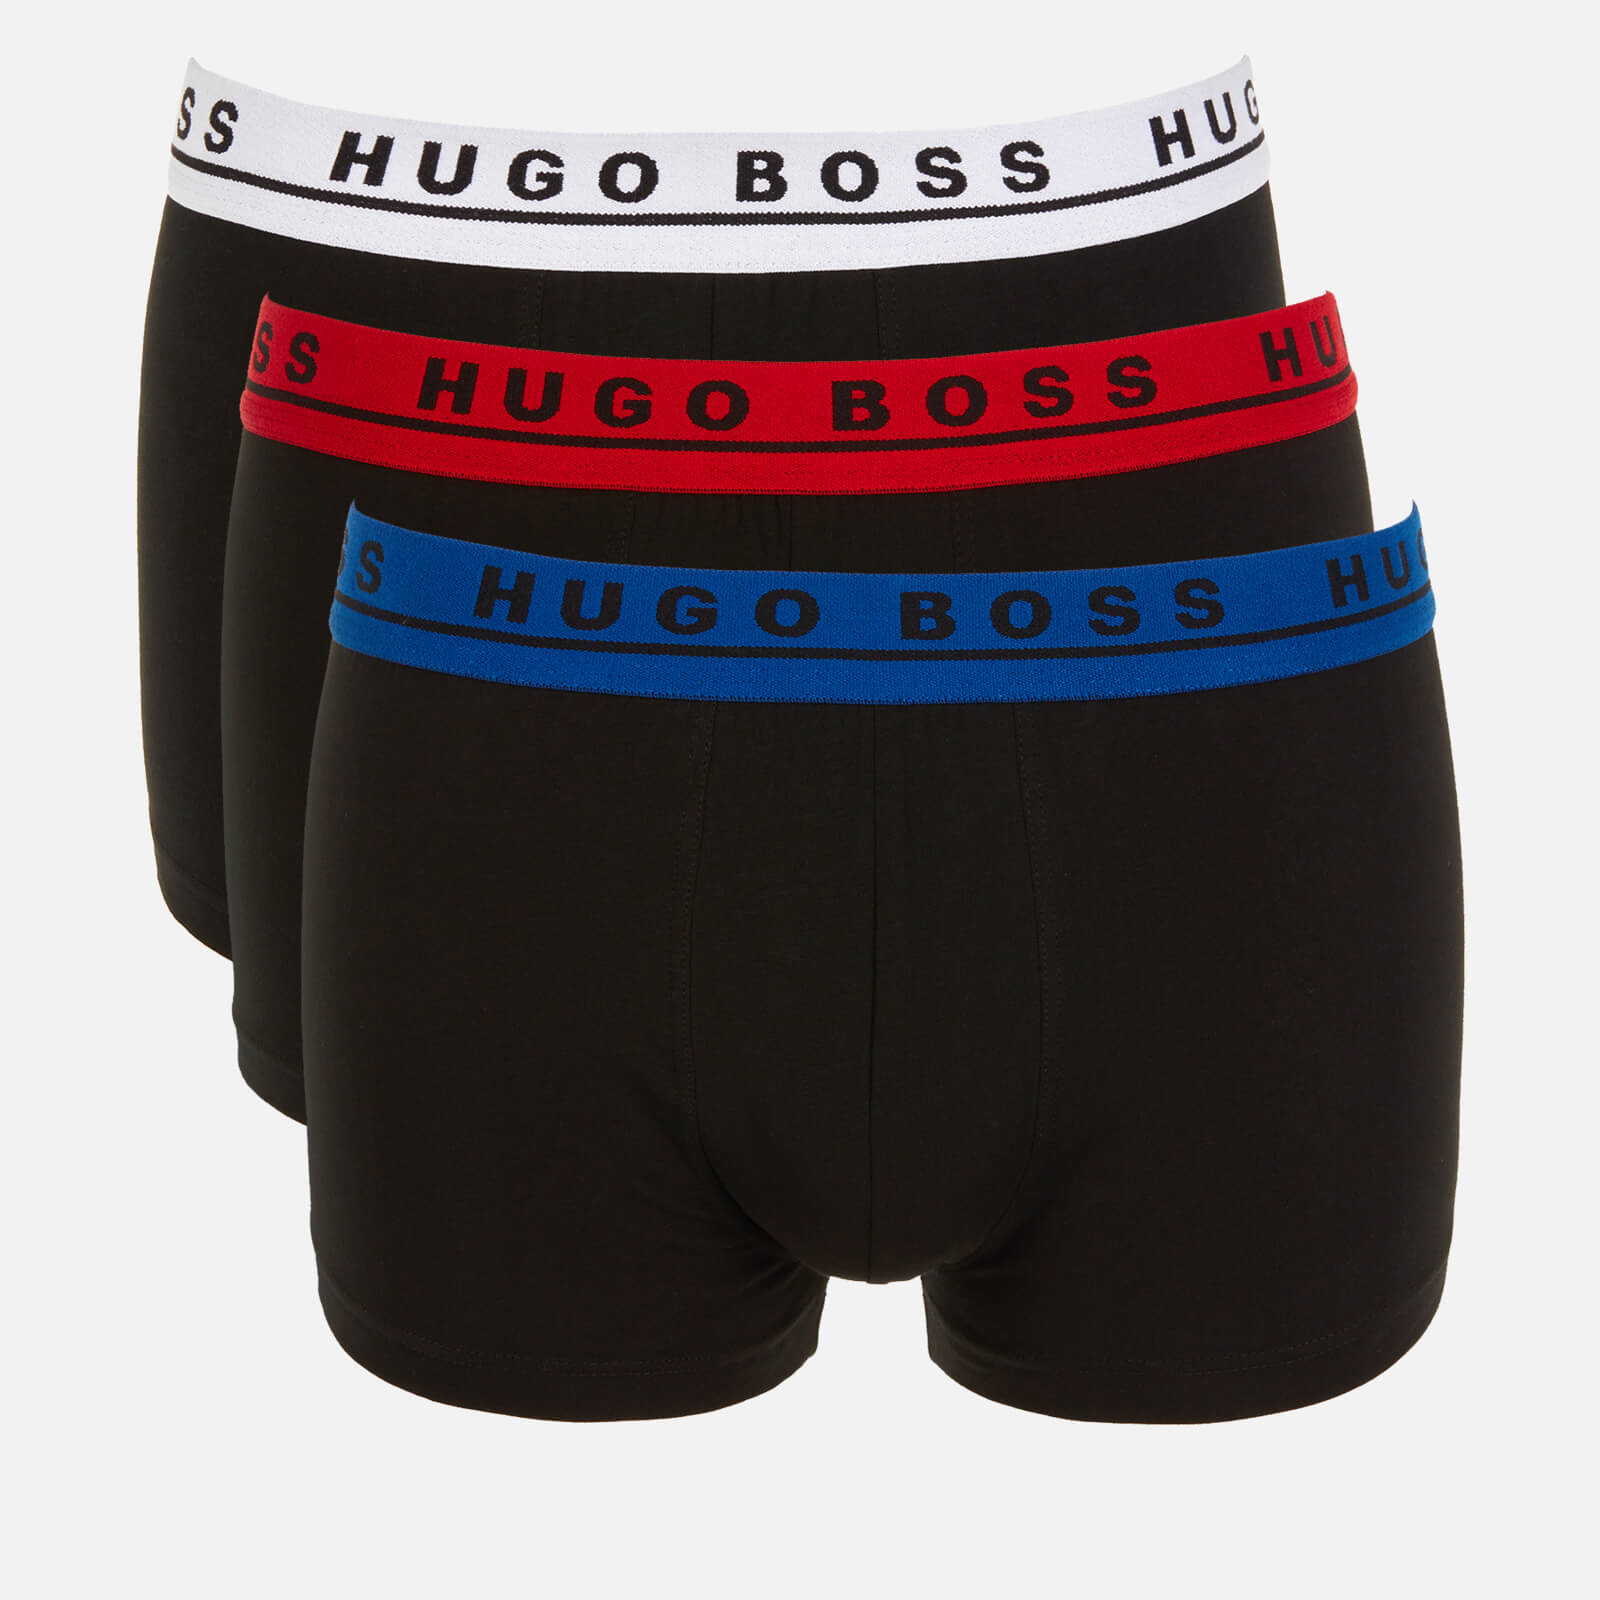 BOSS Bodywear Men's Trunks with Contrast Waistband Triple Pack - White/Red/Blue - S